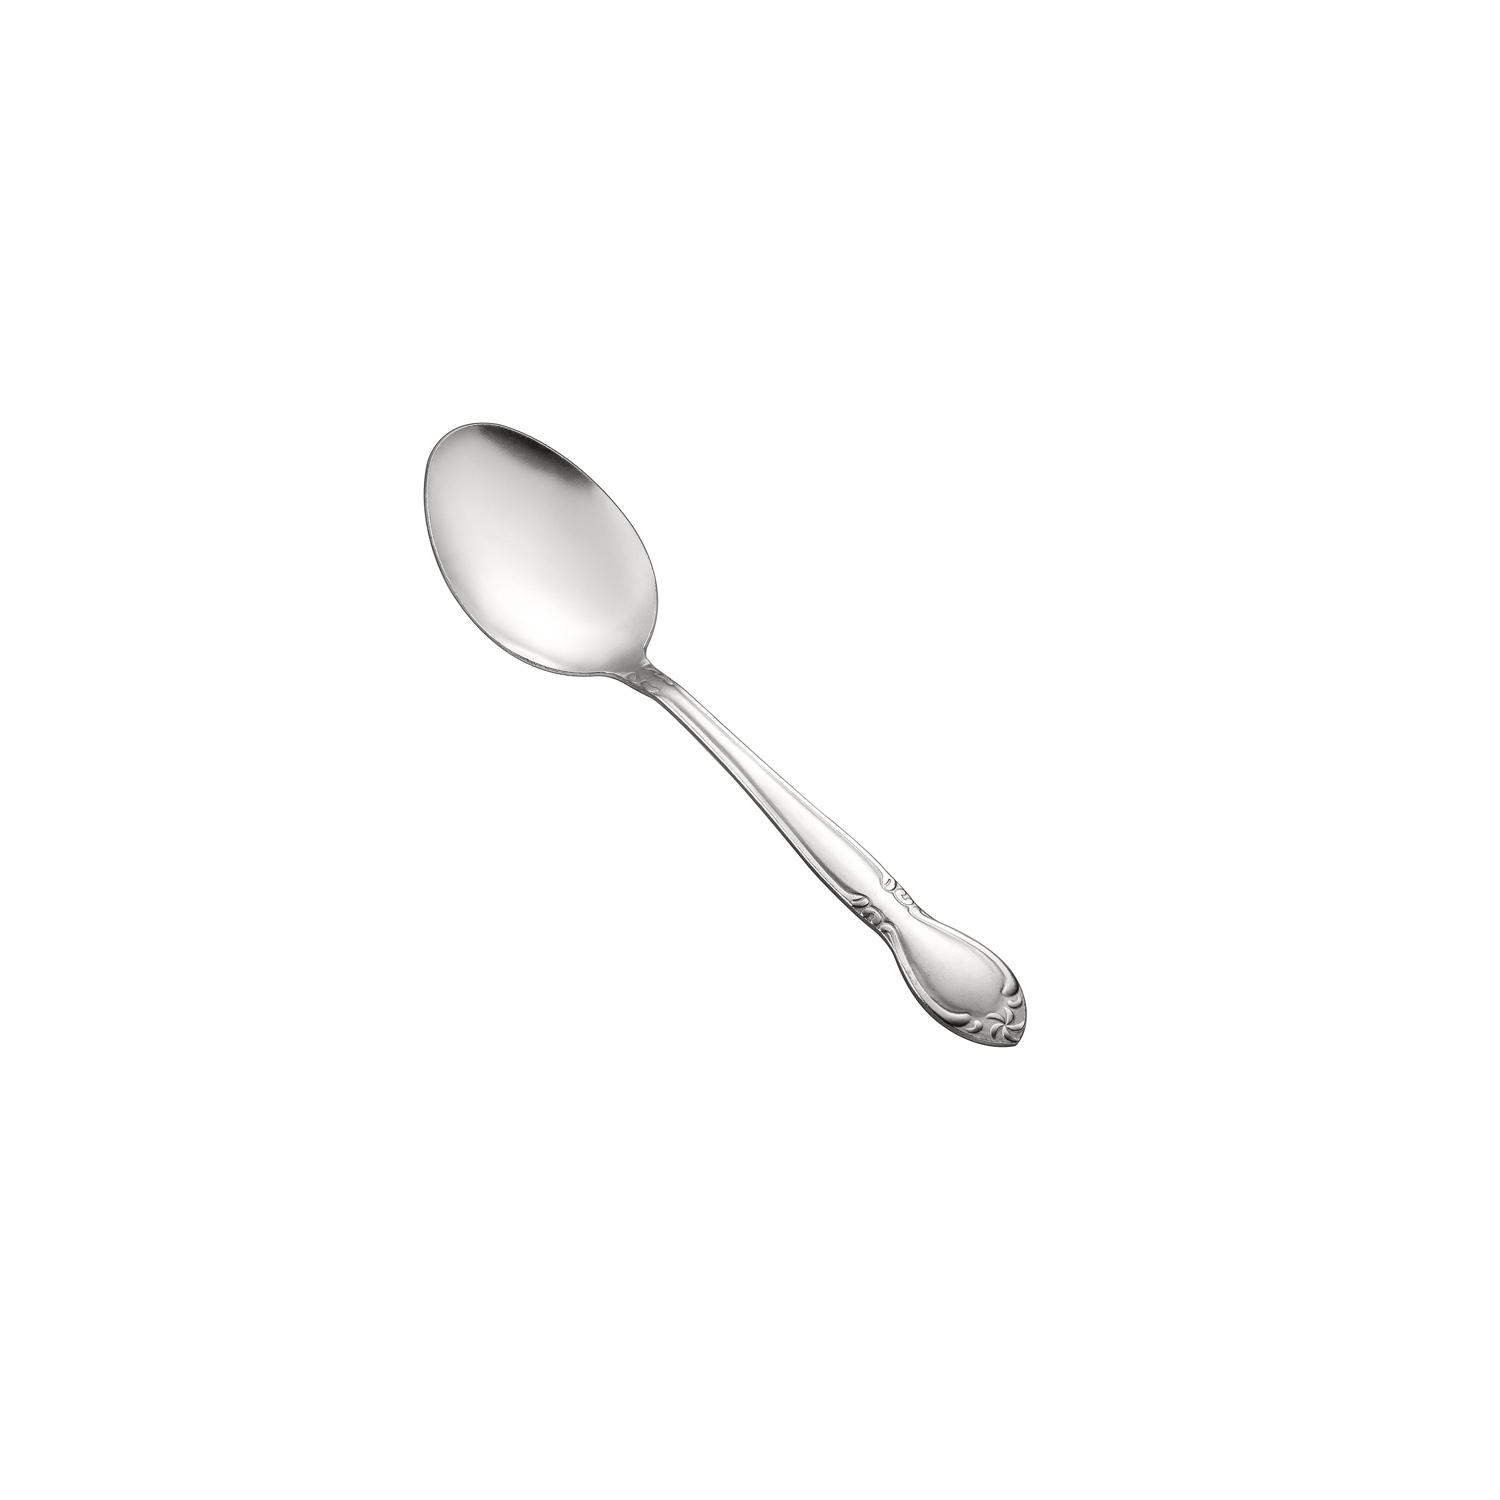 CAC China 2003-03 Elizabeth Dinner Spoon Frost, Heavyweight 18/0, 7 1/4"